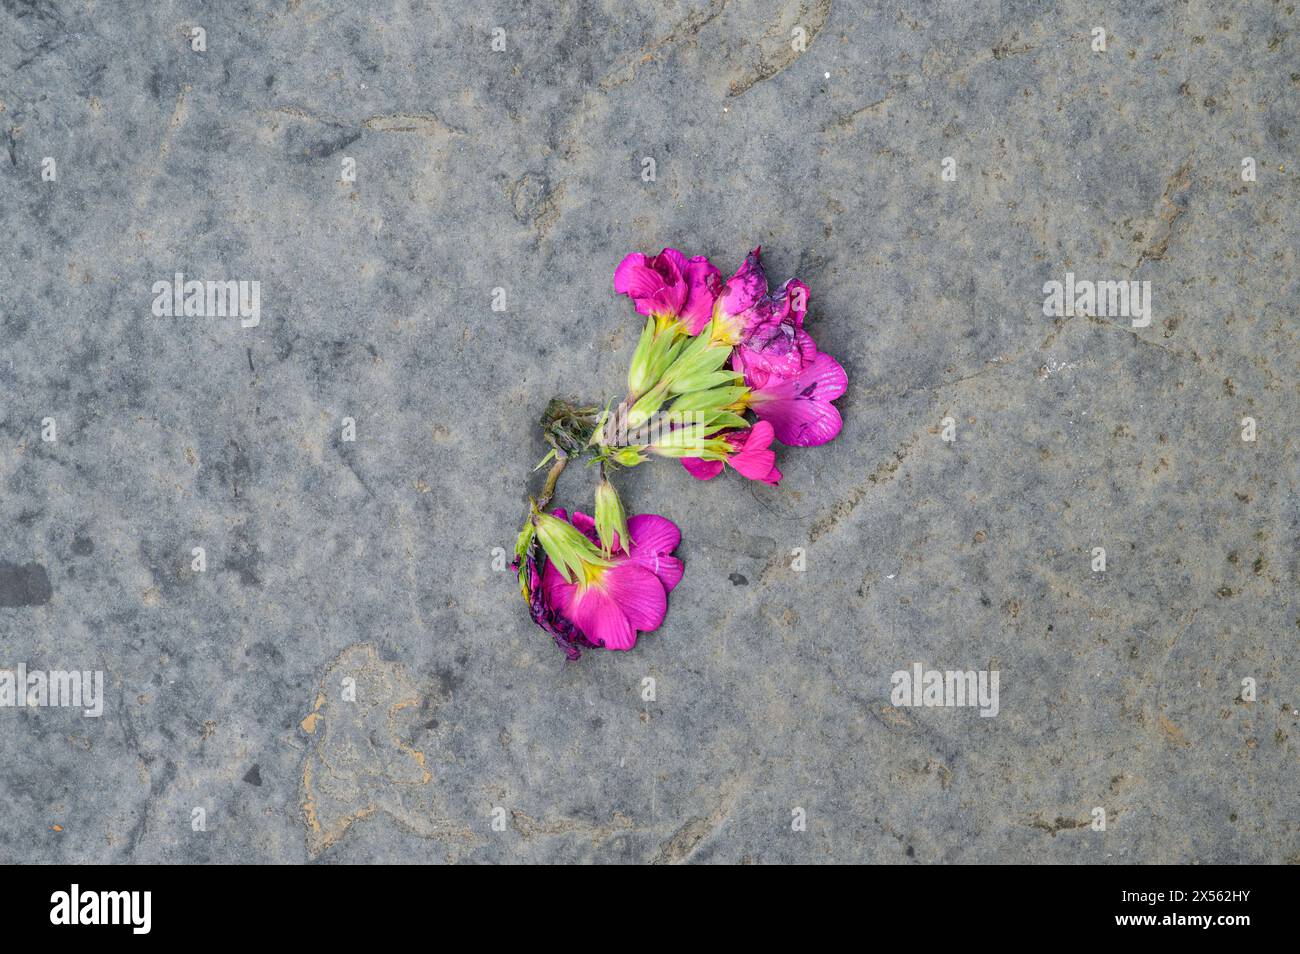 Discarded flowers on a pavement Stock Photo